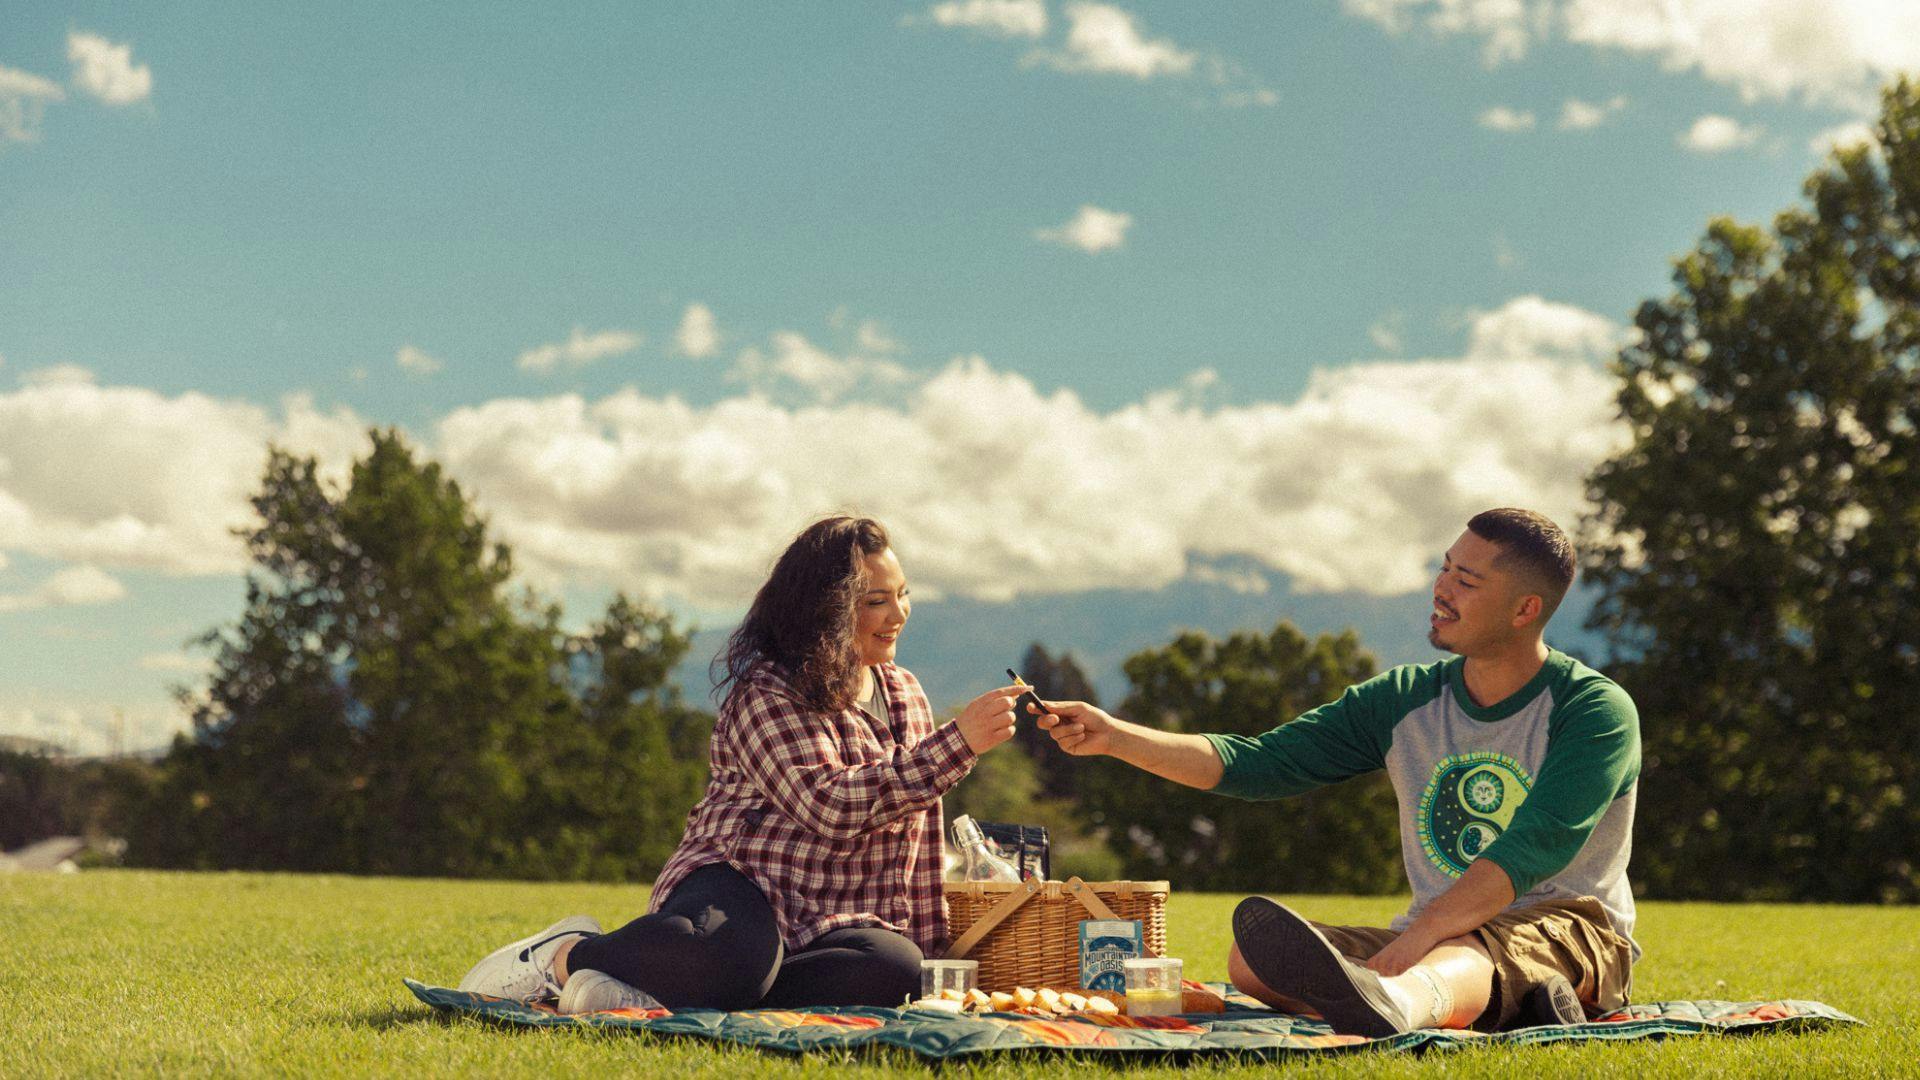 a photo of a woman and a man sitting on a picnic blanket in a field of green grass with blue skies and fluffy white clouds. he is handing her a cannabis vape pen and in addition to picnic snacks, there is a package of Oasis cannabis powder on the blanket.